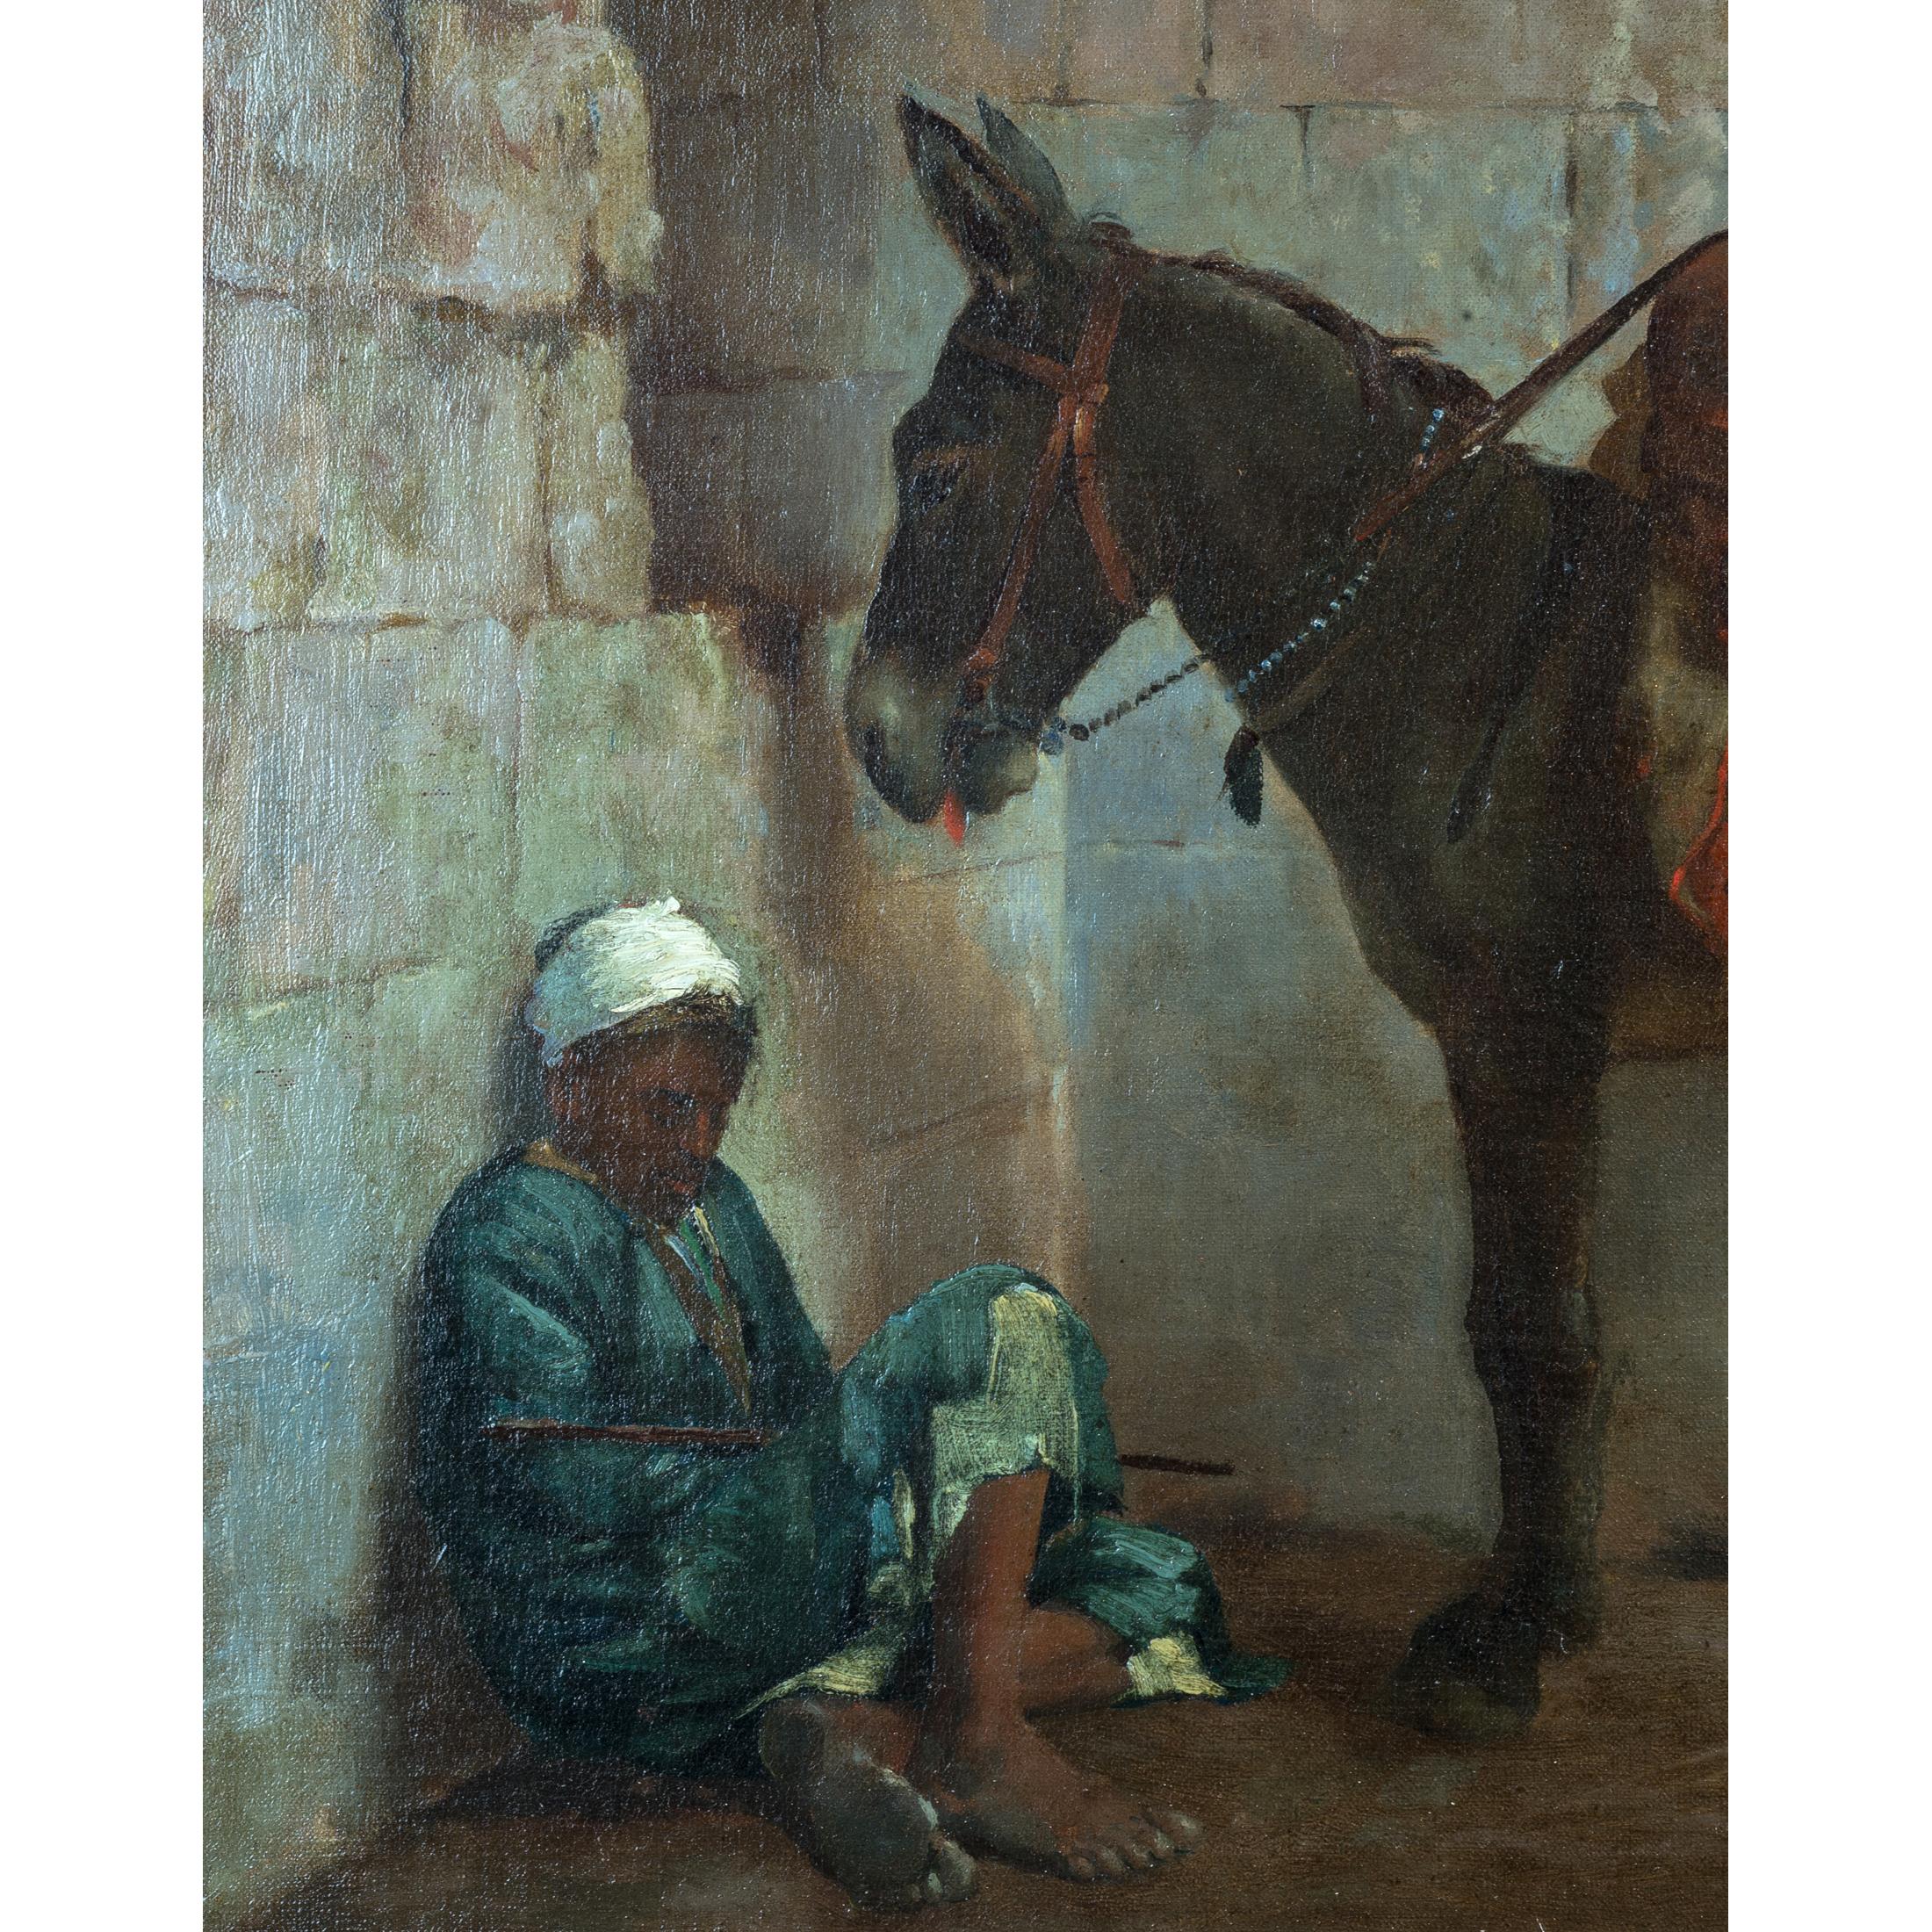 Italian Fine Orientalist Painting of a Young Boy with Donkey by Nicola Forcella